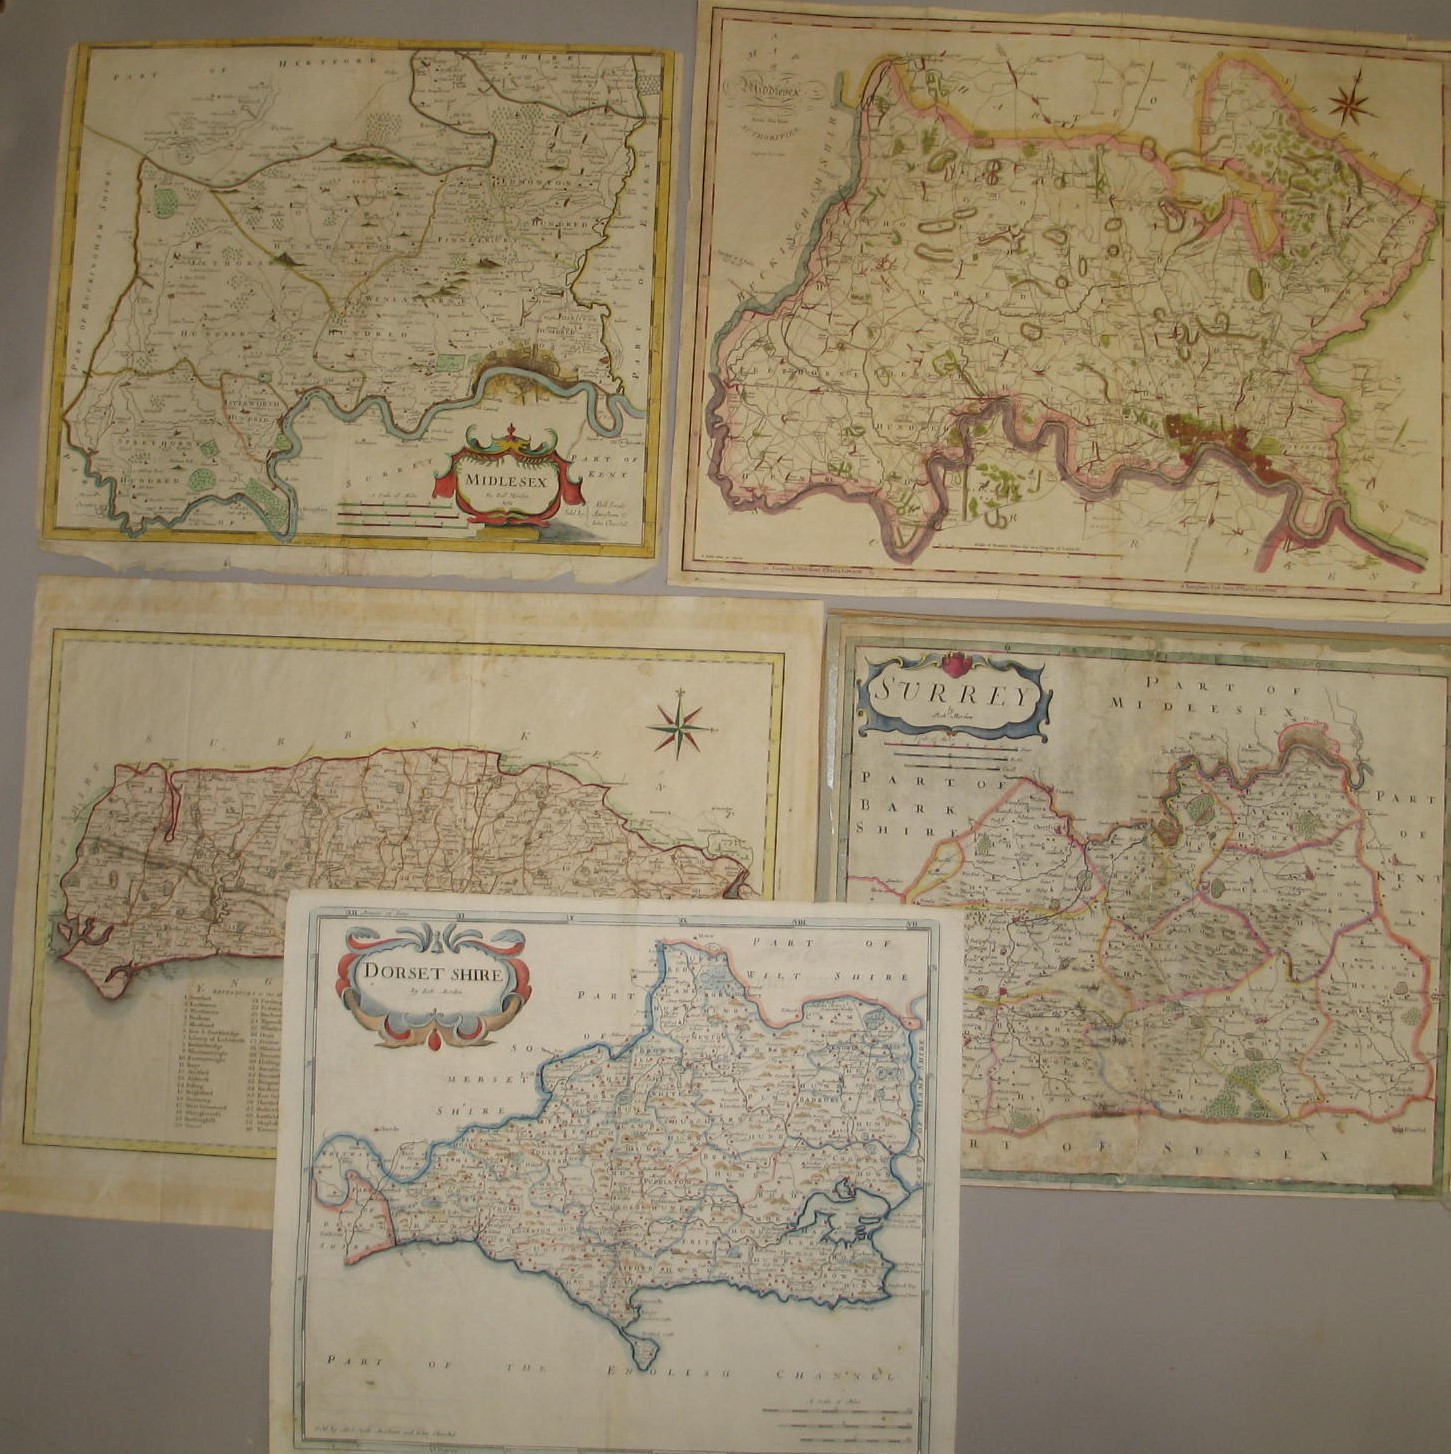 [MAPS] MORDEN, Dorsetshire; [and] Middlesex; [and]Surrey; CARY, A Map of Middlesex [and] A Map of